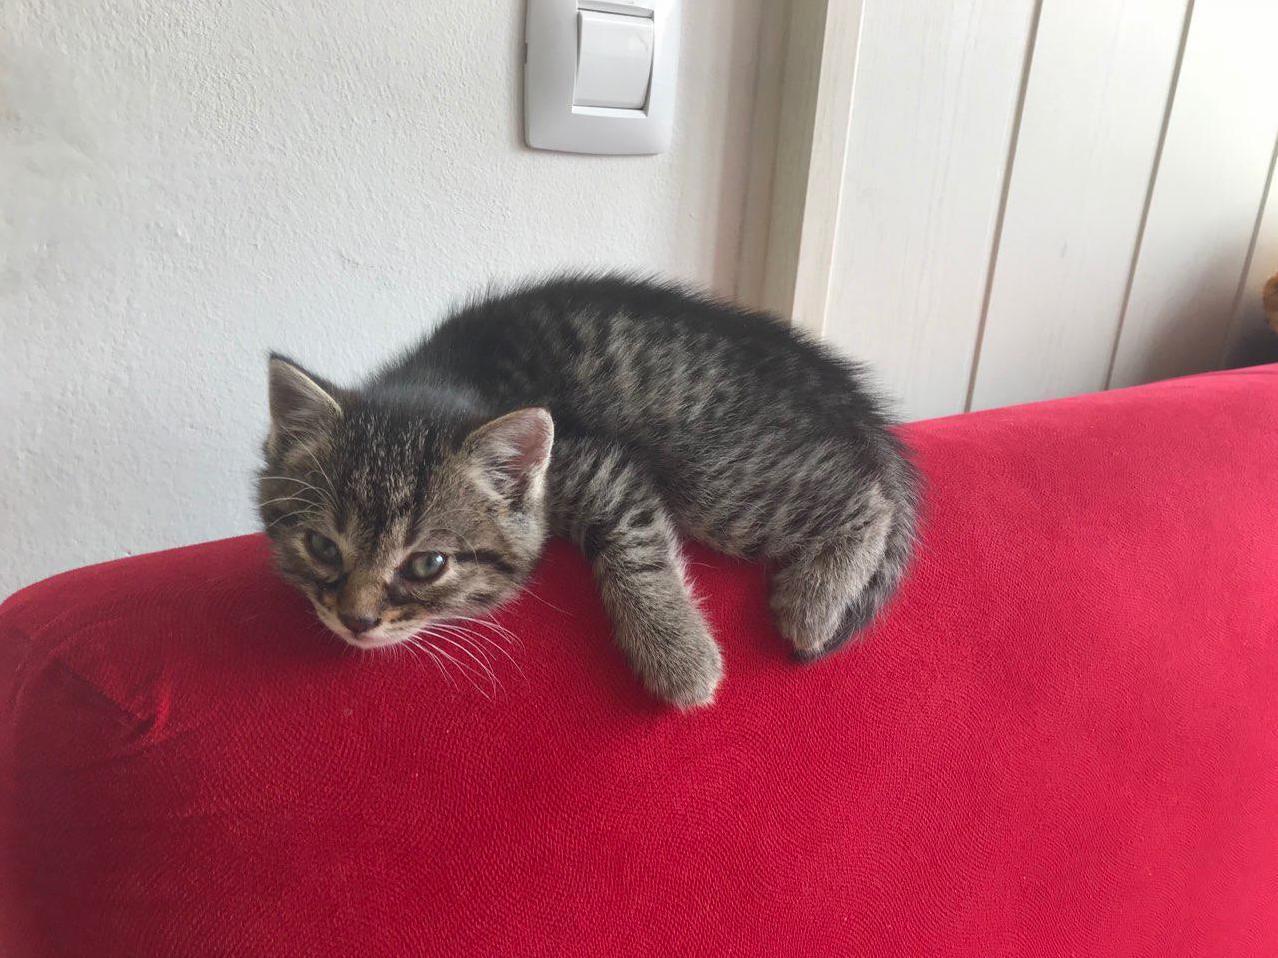 Picked this lil fella up yesterday. needless to say i was amazed how quickly he stole my couch p